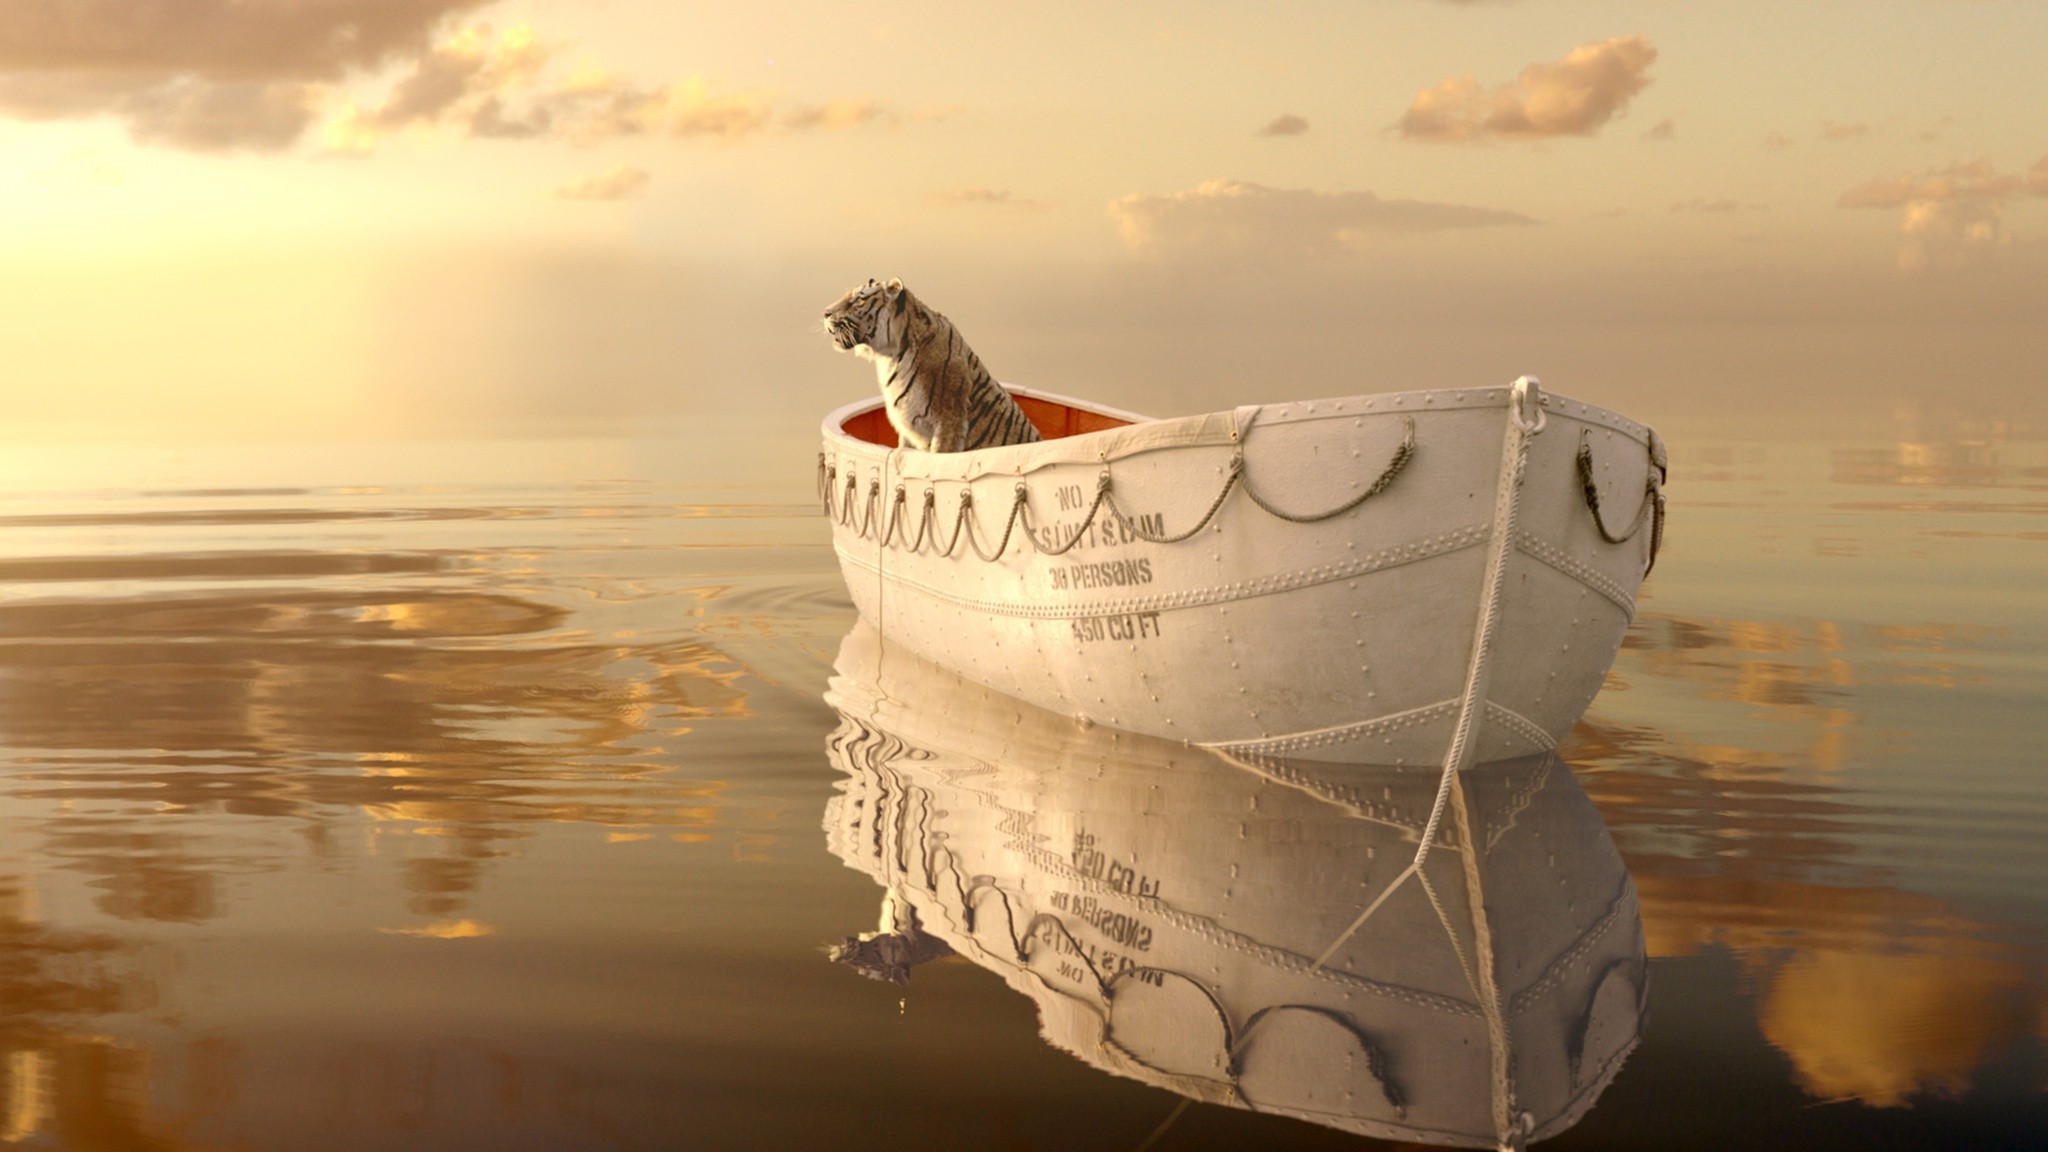 animals, Cats, Tiger, Water, Ocean, Sea, Reflection, Sky, Clouds, Boats, Vehicle, Rope, Mood, Surreal, Manipulation, Cg, Digital, Scenic, Wierd, Psychedelic Wallpaper